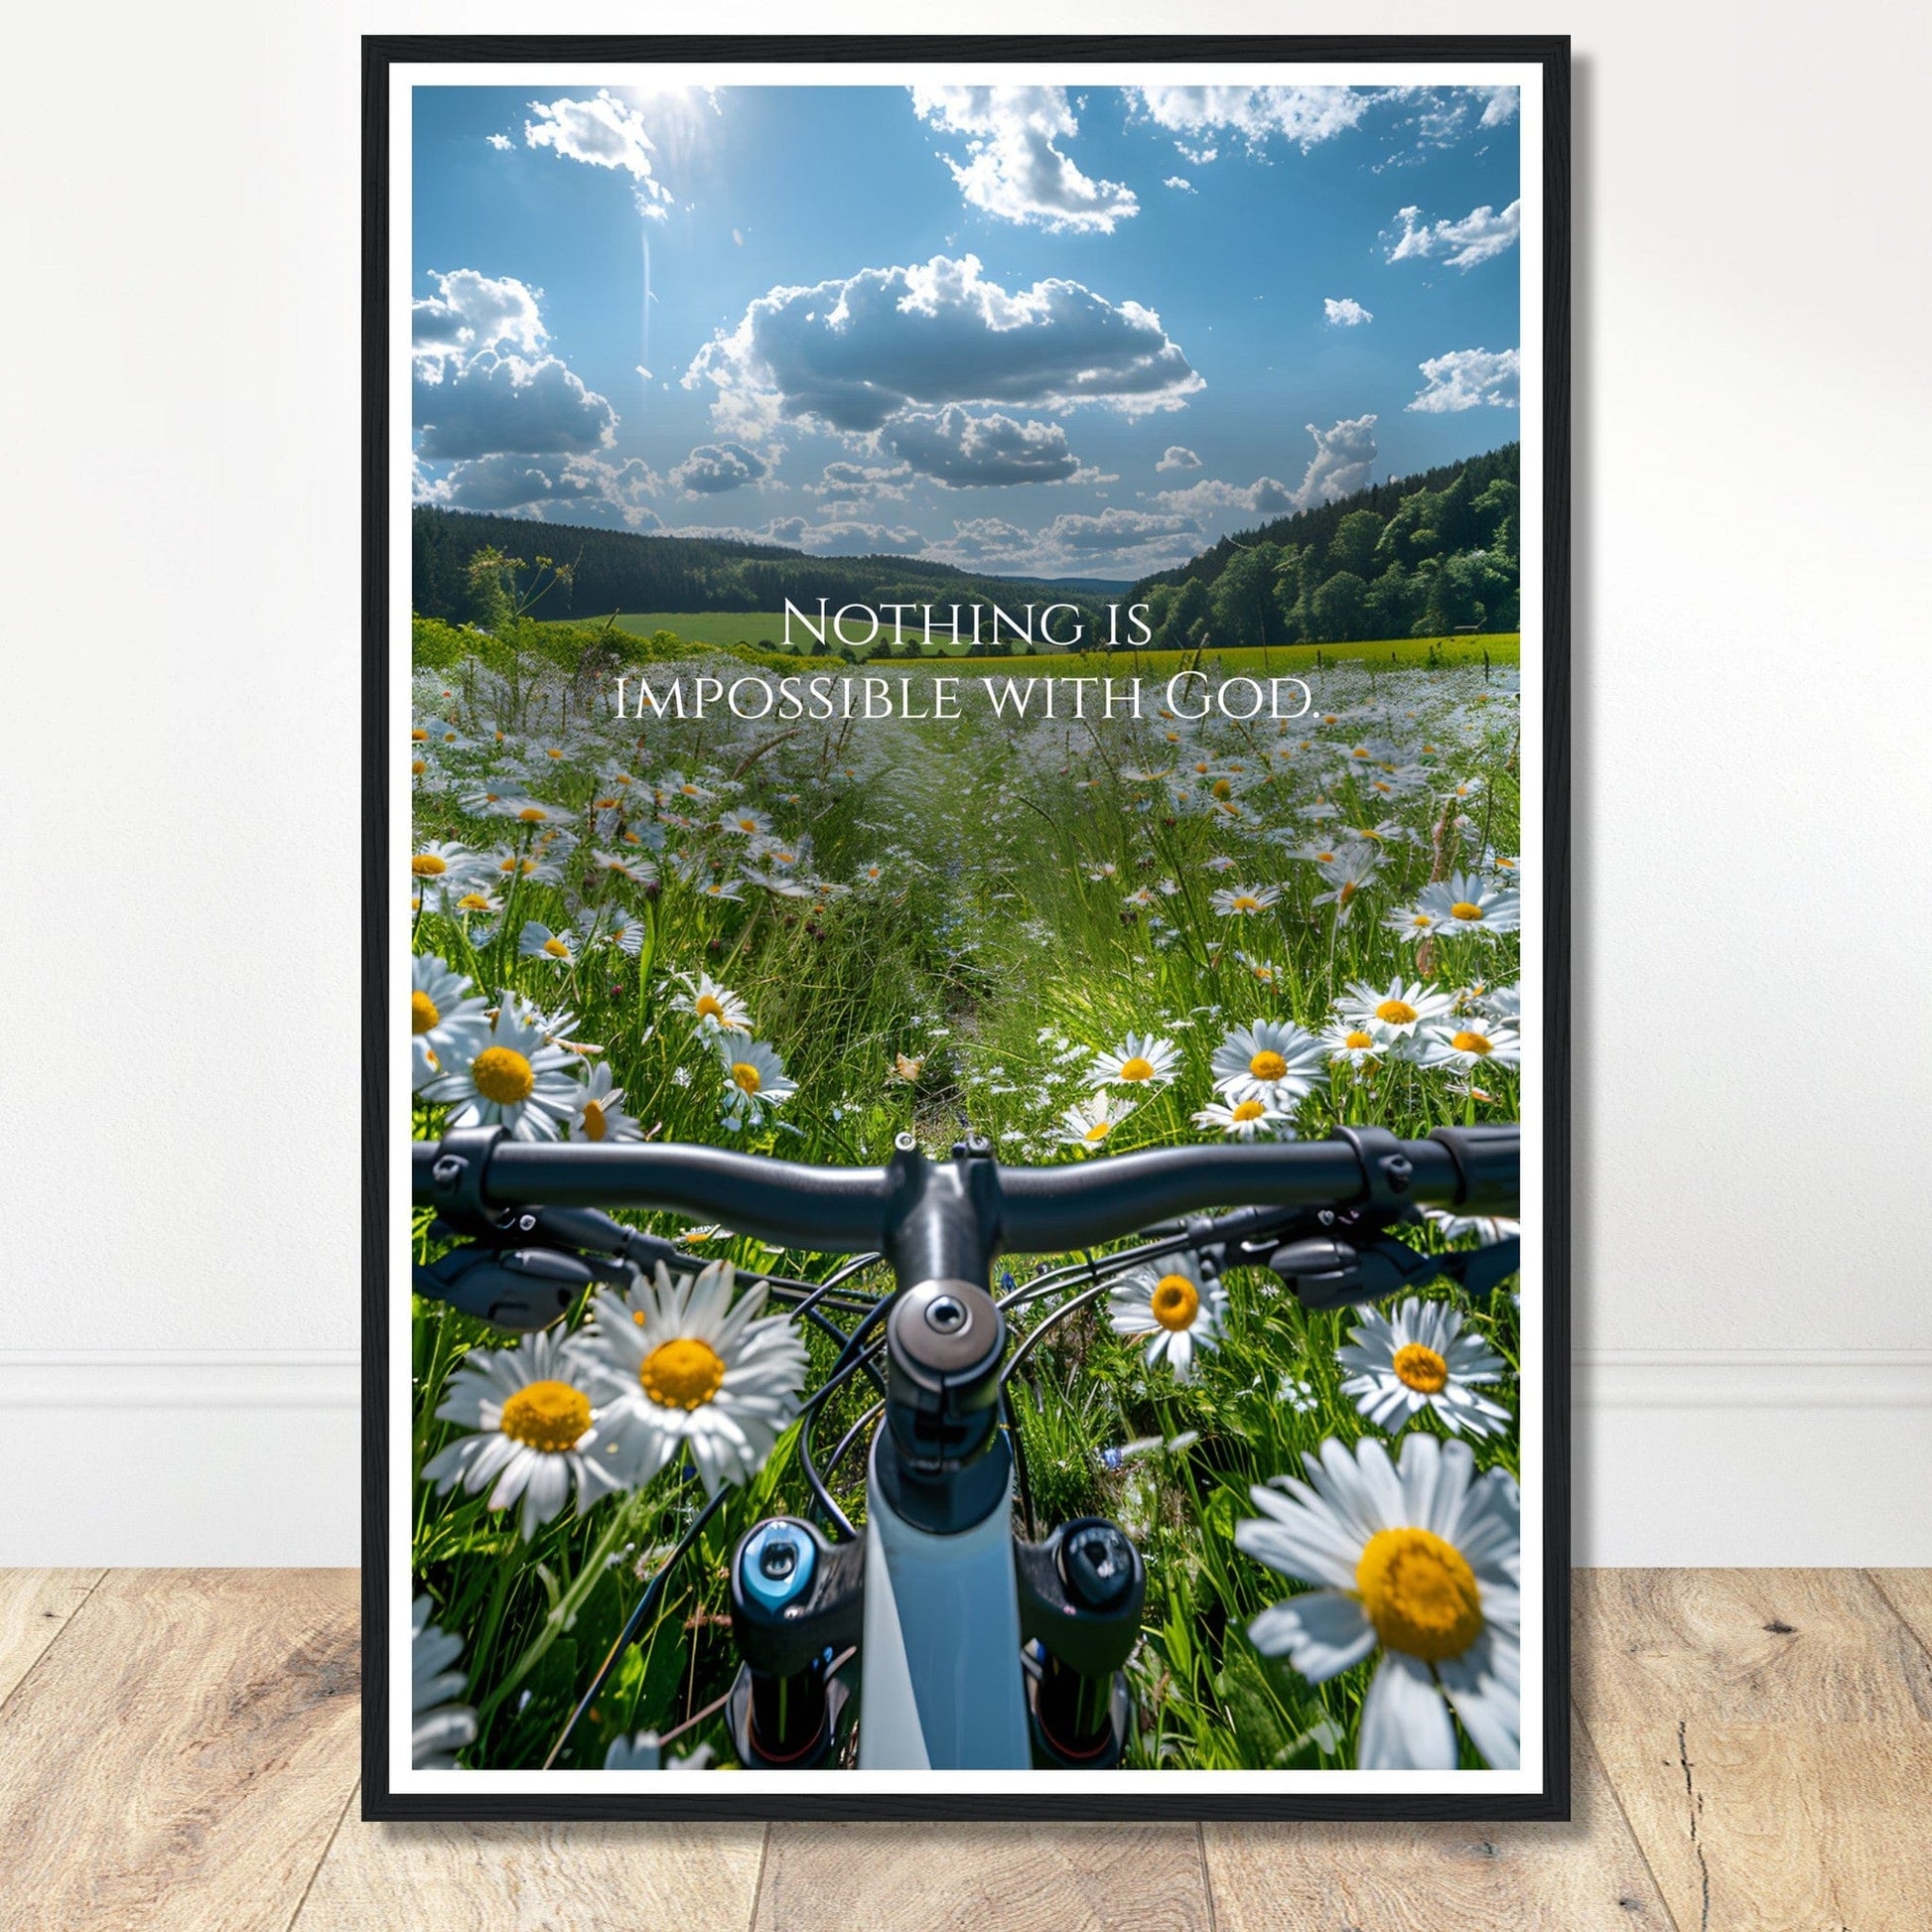 Coffee With My Father Print Material 60x90 cm / 24x36″ / Premium Matte Paper Wooden Framed Poster / Black frame Nothing is Impossible With God - Artwork